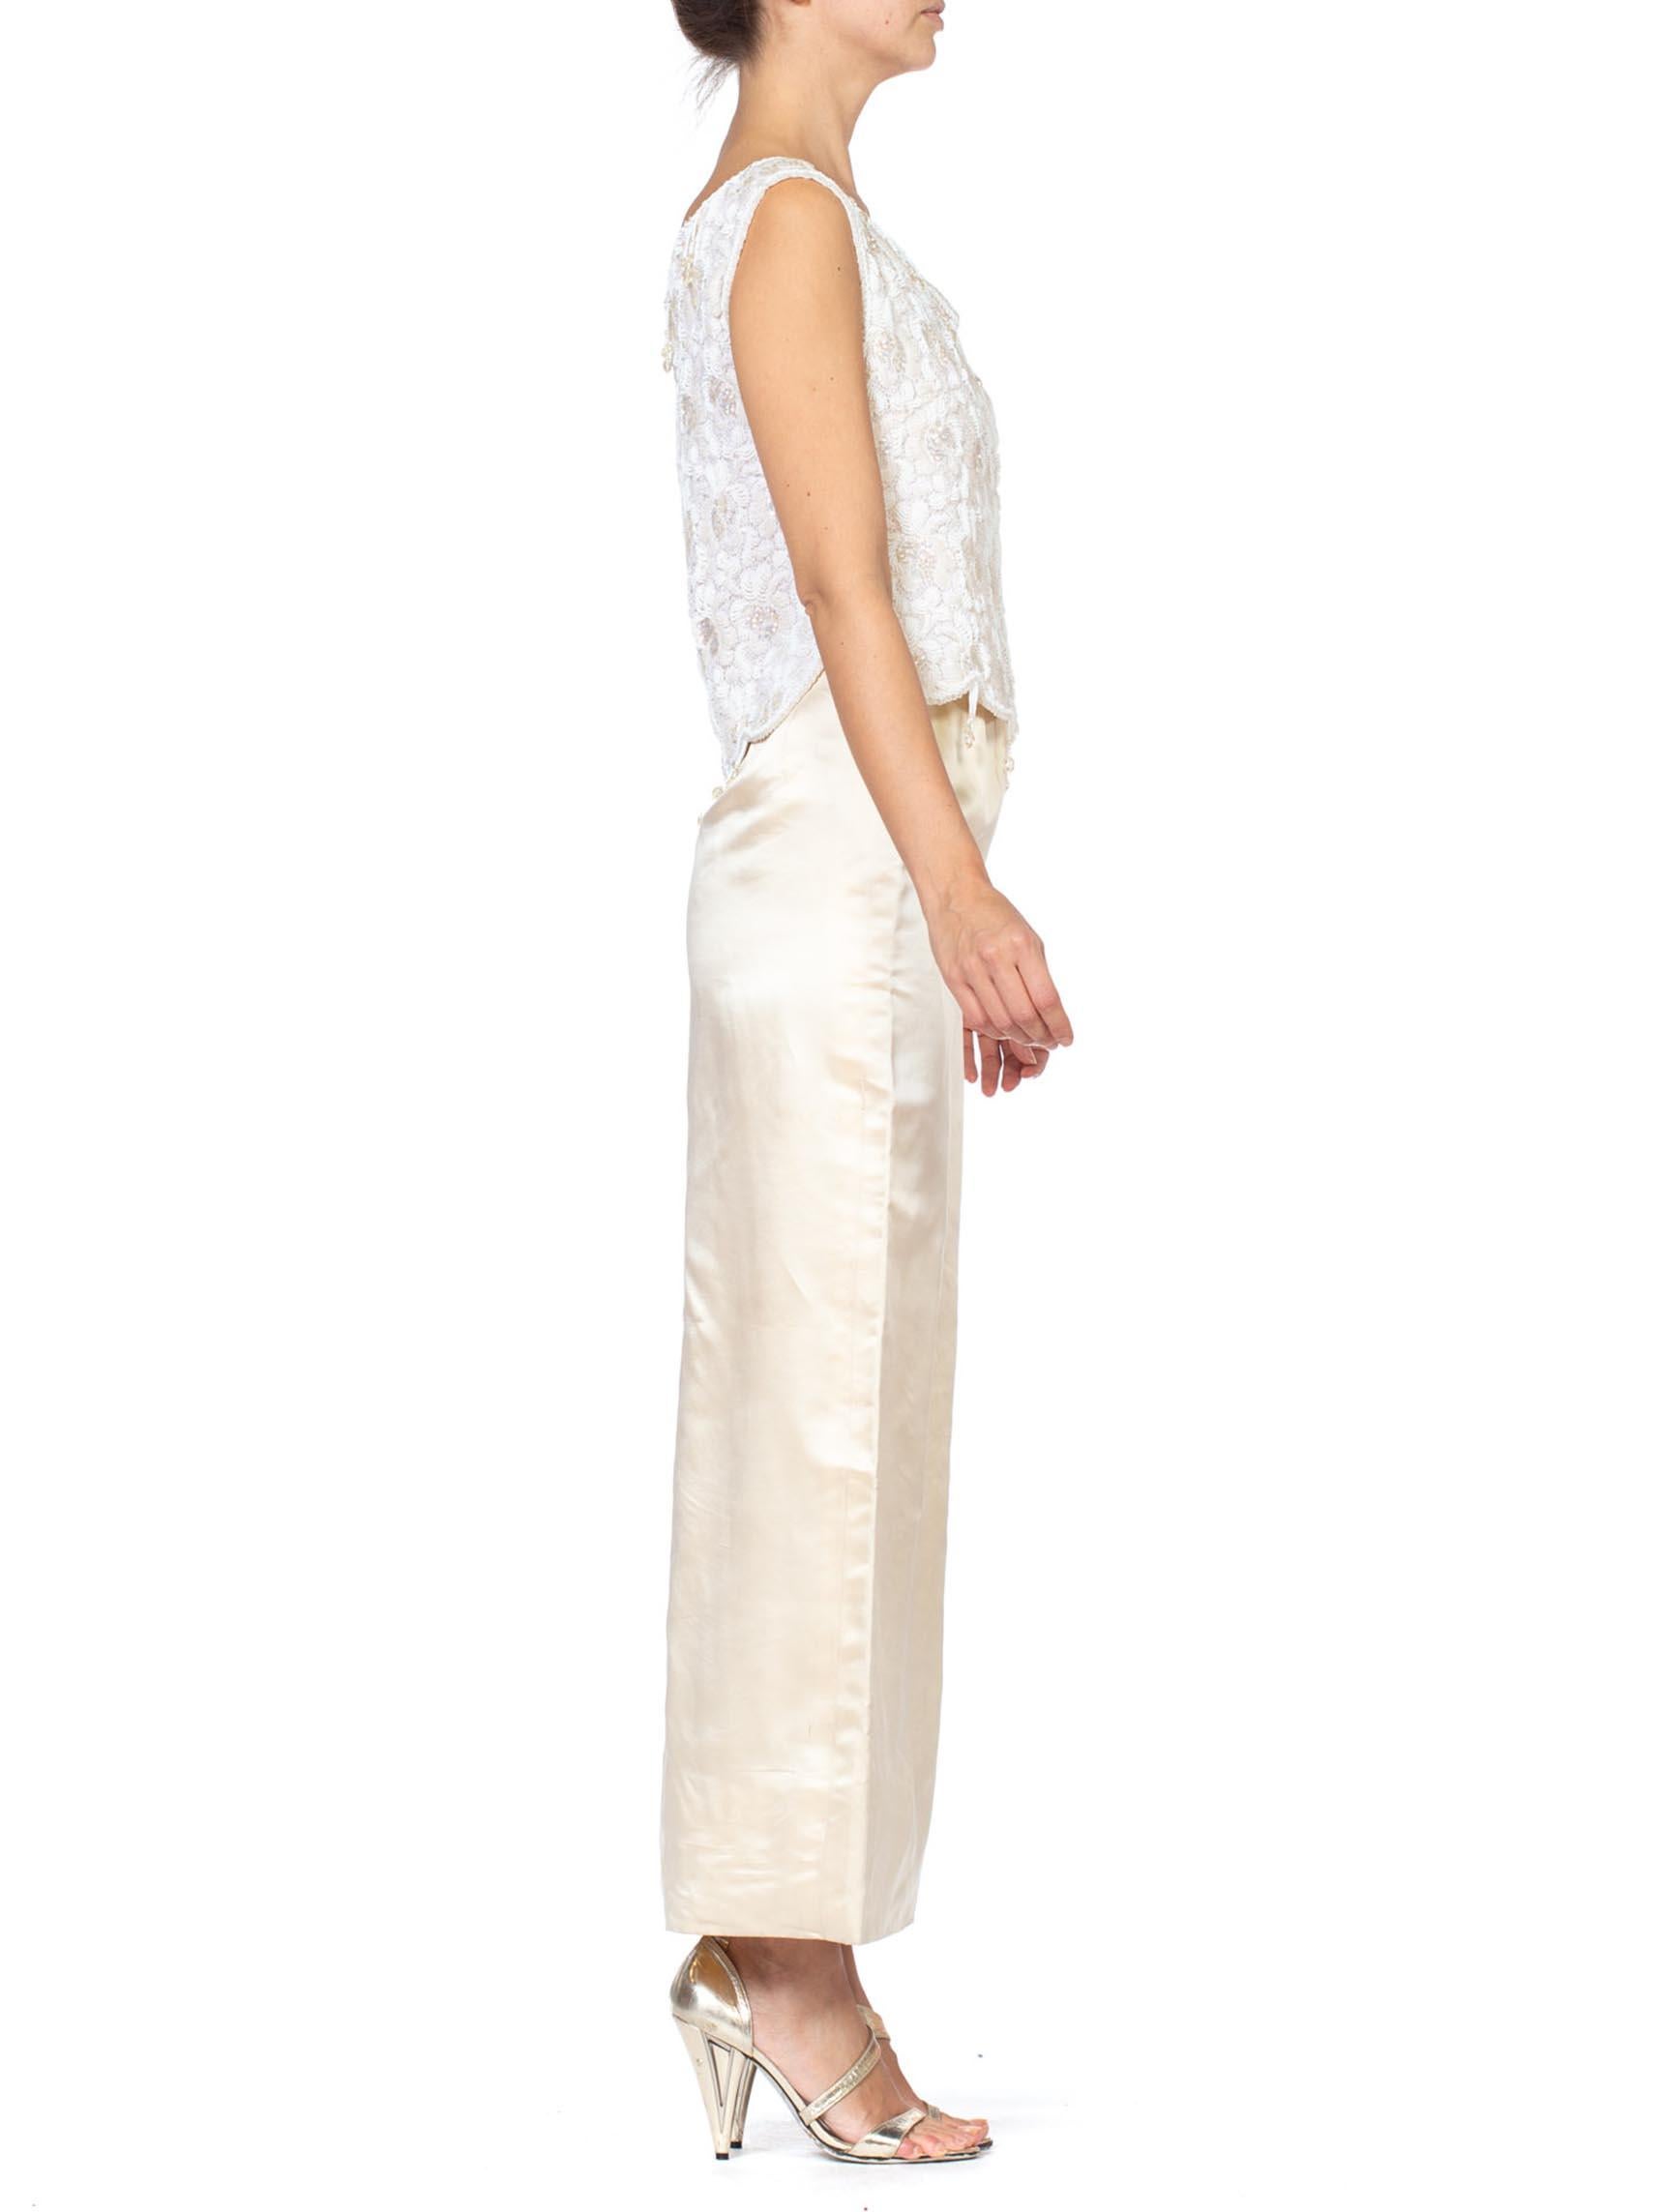 Women's 1960S White & Ivory Silk Satin Evening Gown Ensemble With Beaded Lace Tunic For Sale